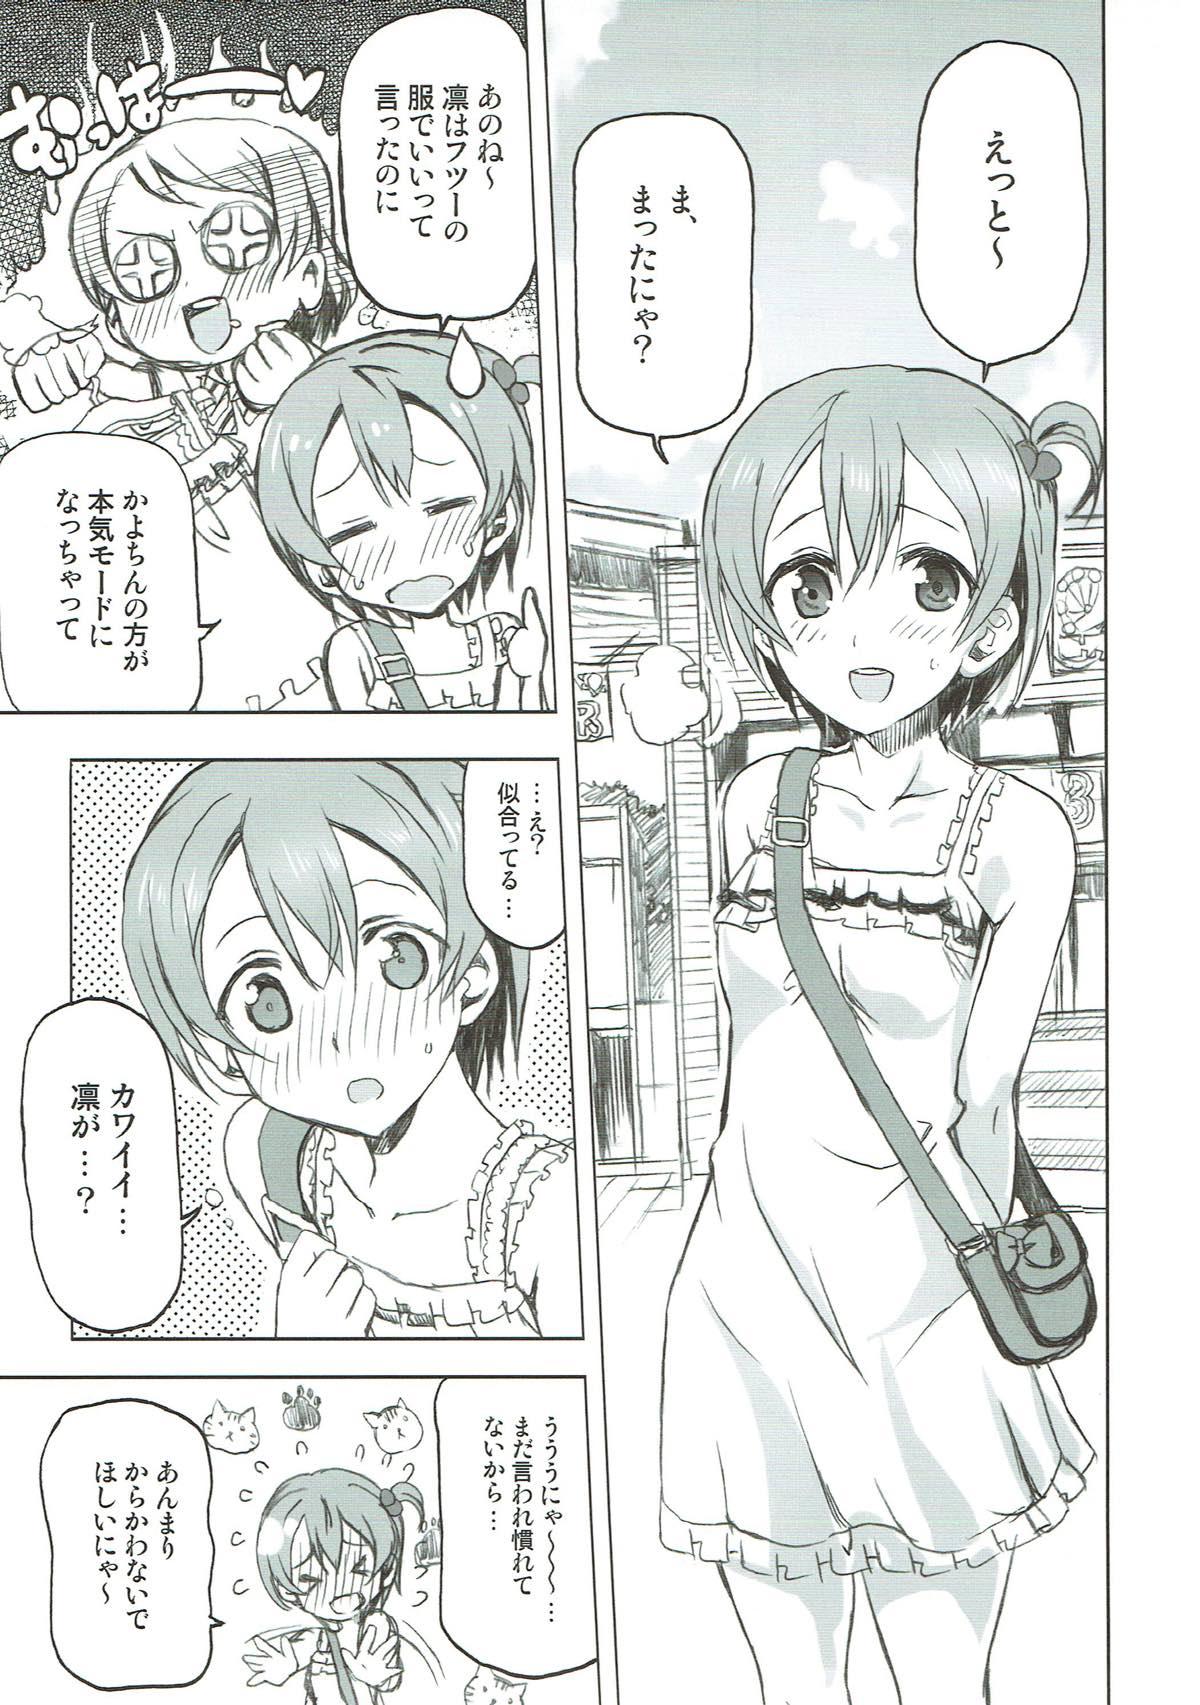 Handsome Hoshisora Kanojo. - Love live Swallow - Page 6